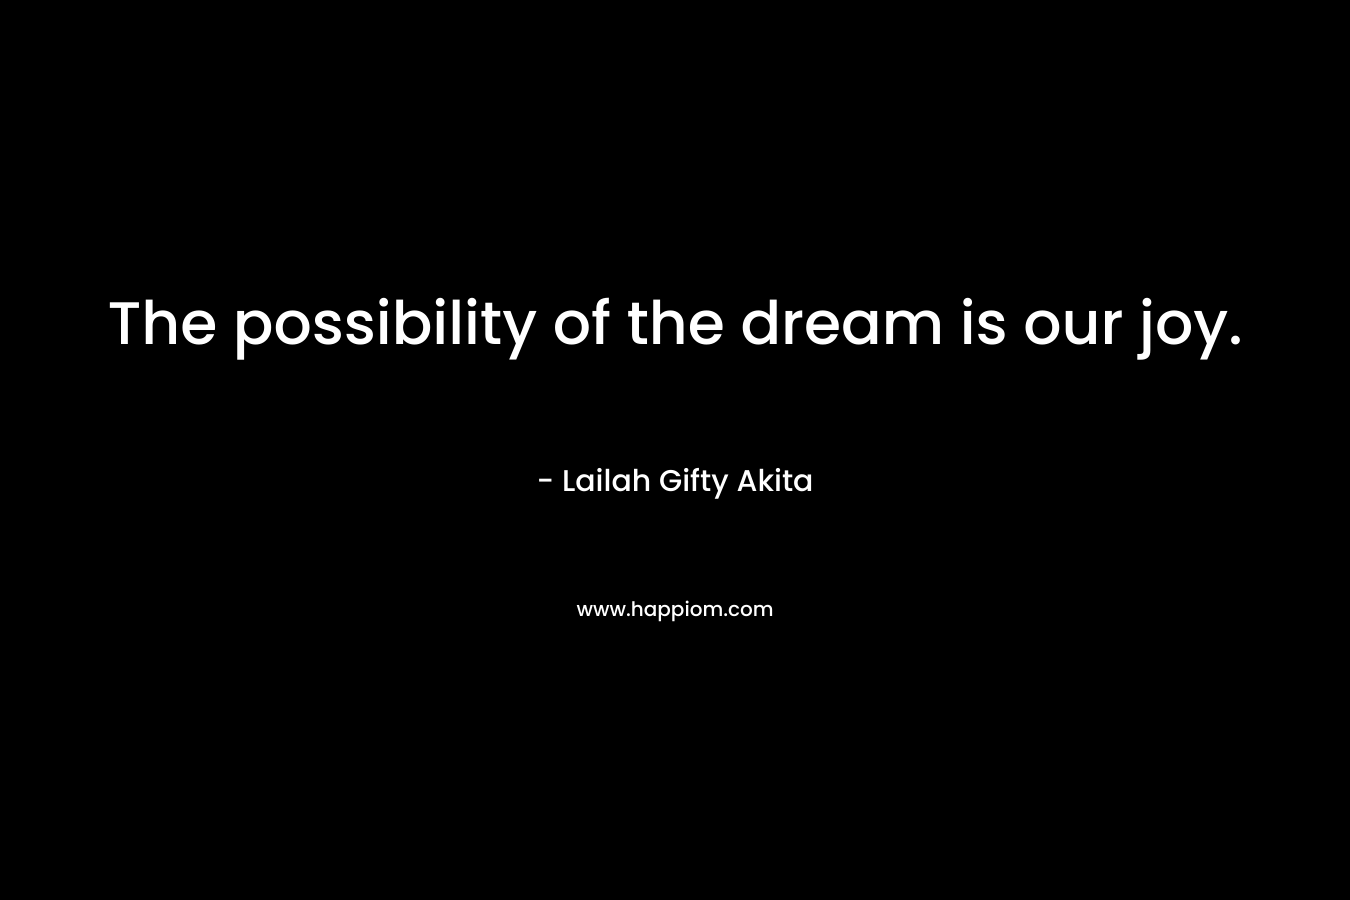 The possibility of the dream is our joy.